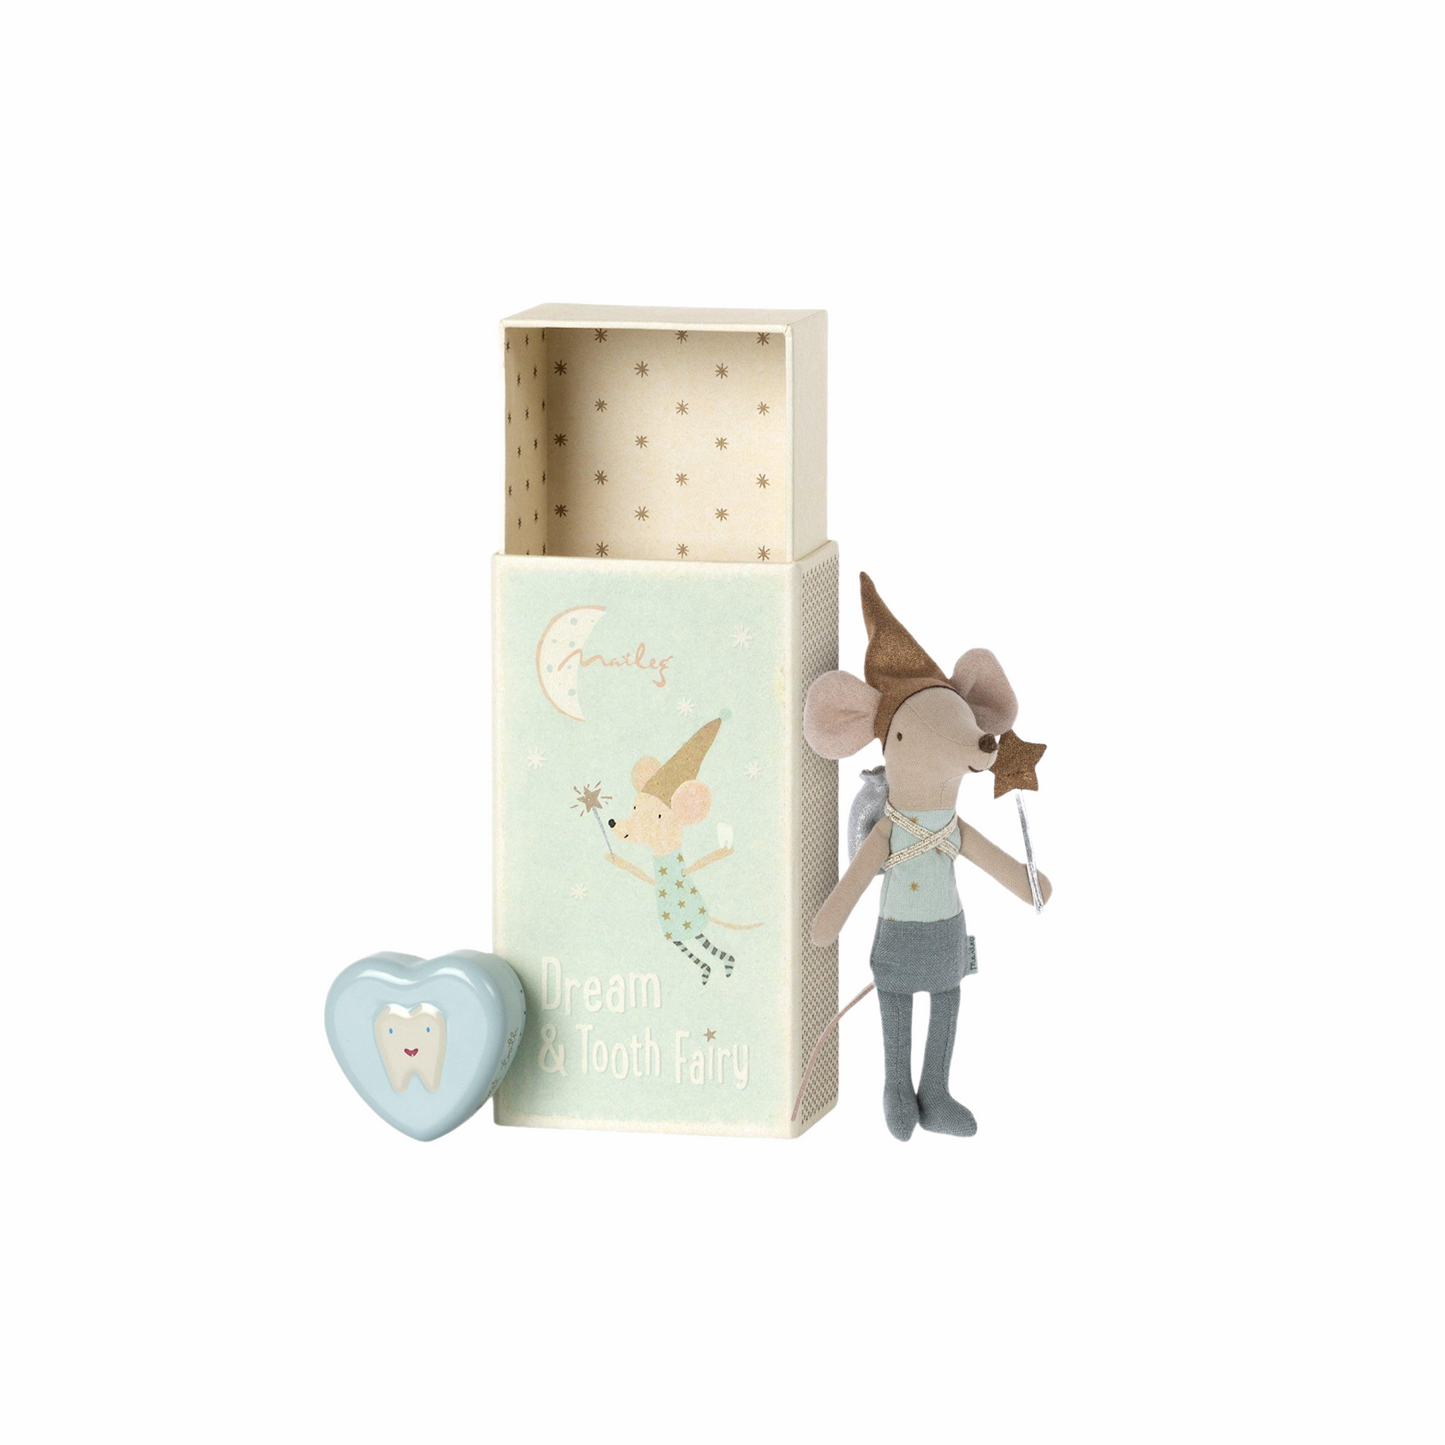 Tooth Fairy Mouse in Matchbox in Blue